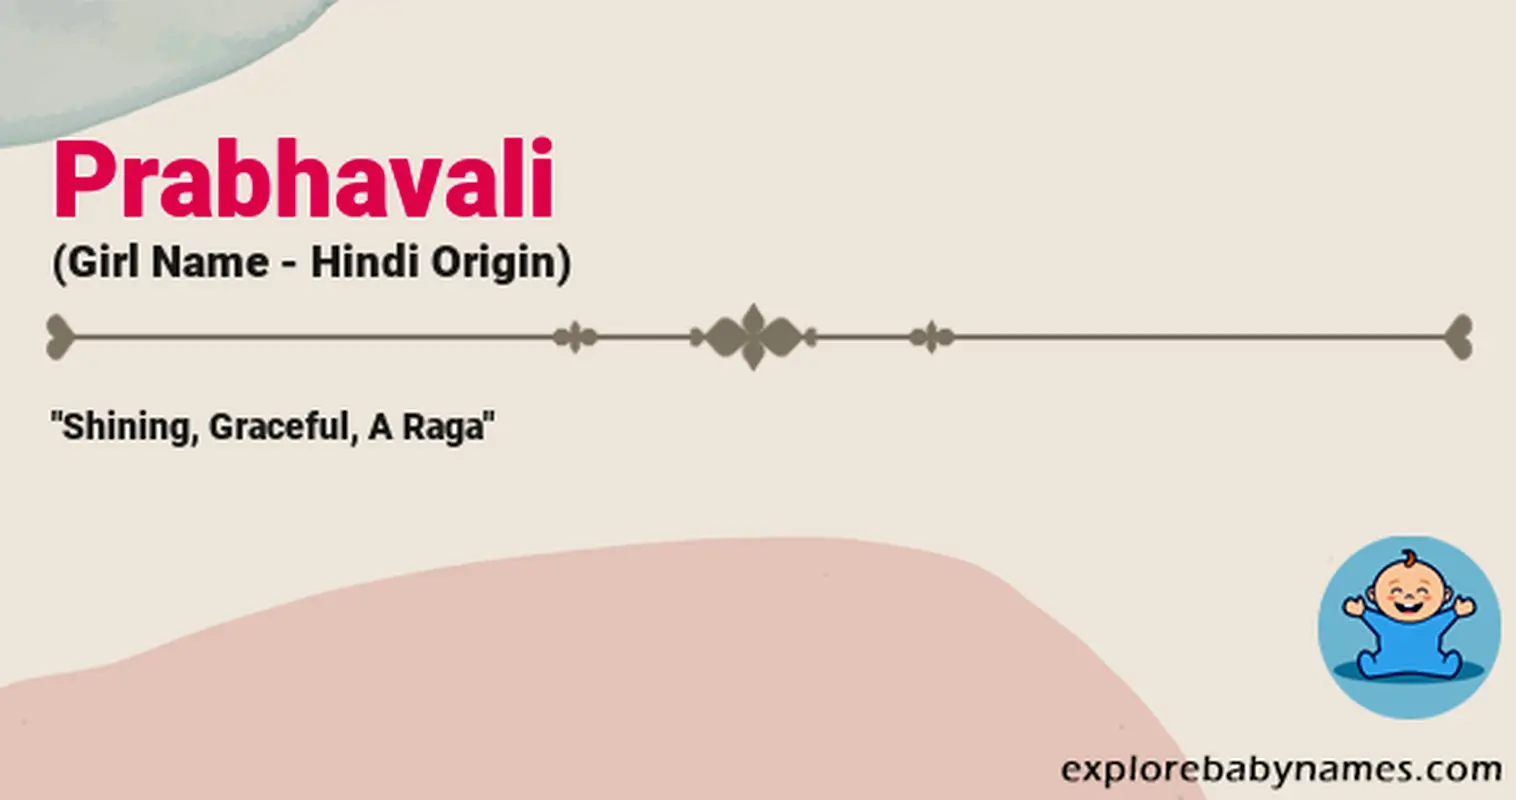 Meaning of Prabhavali